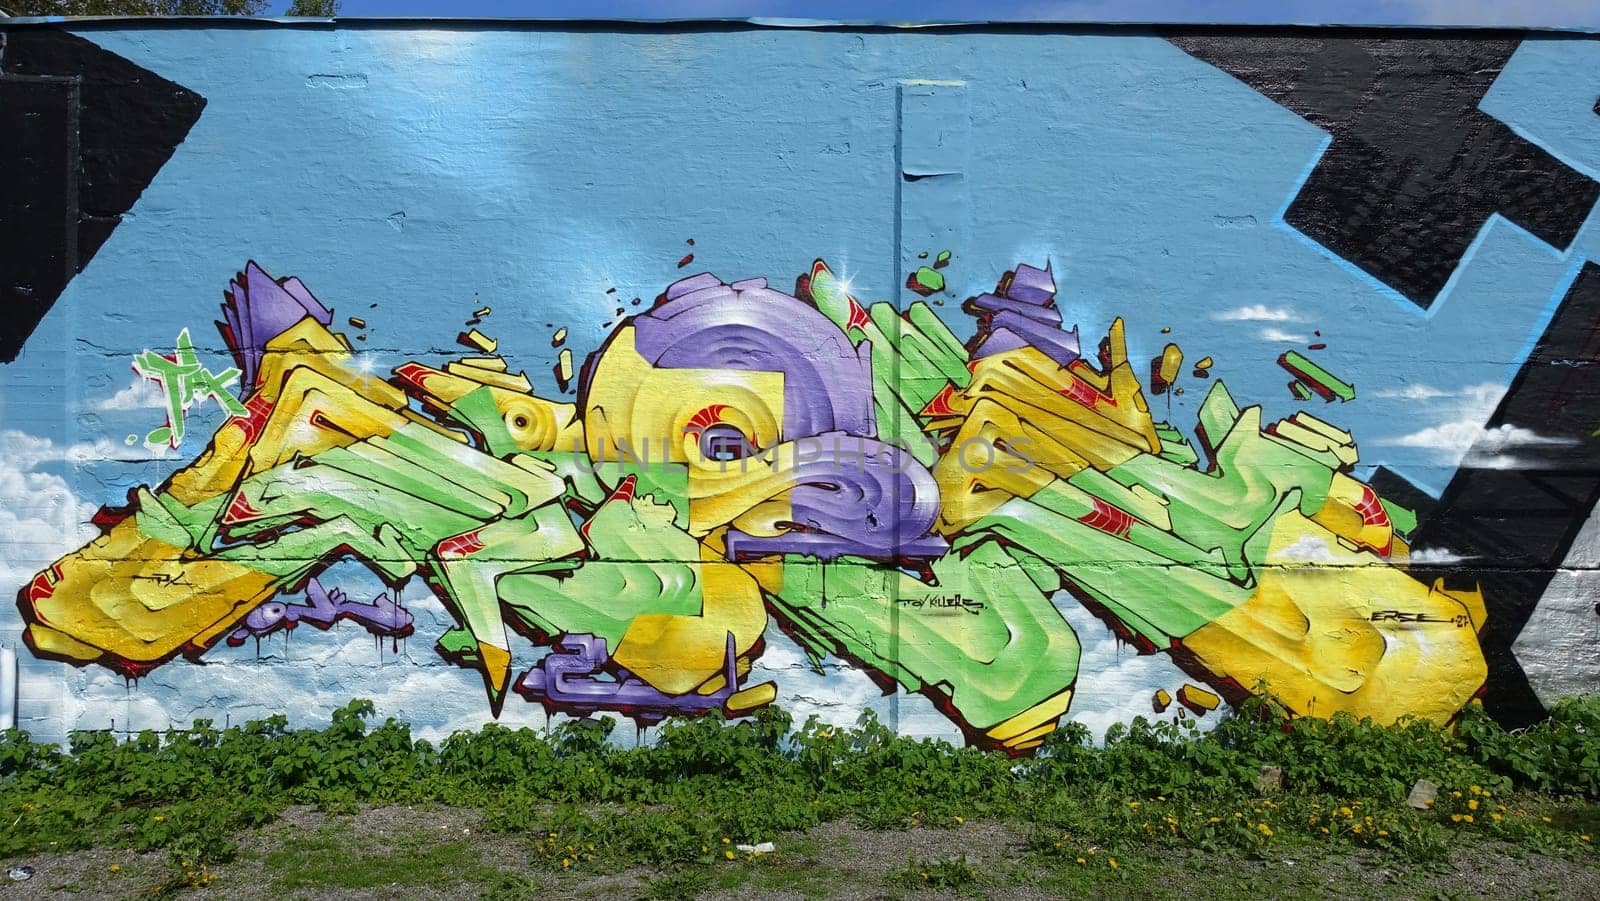 Stockholm, Sweden, May 23 2021. Graffiti exhibition on the outskirts of the city. by Jamaladeen